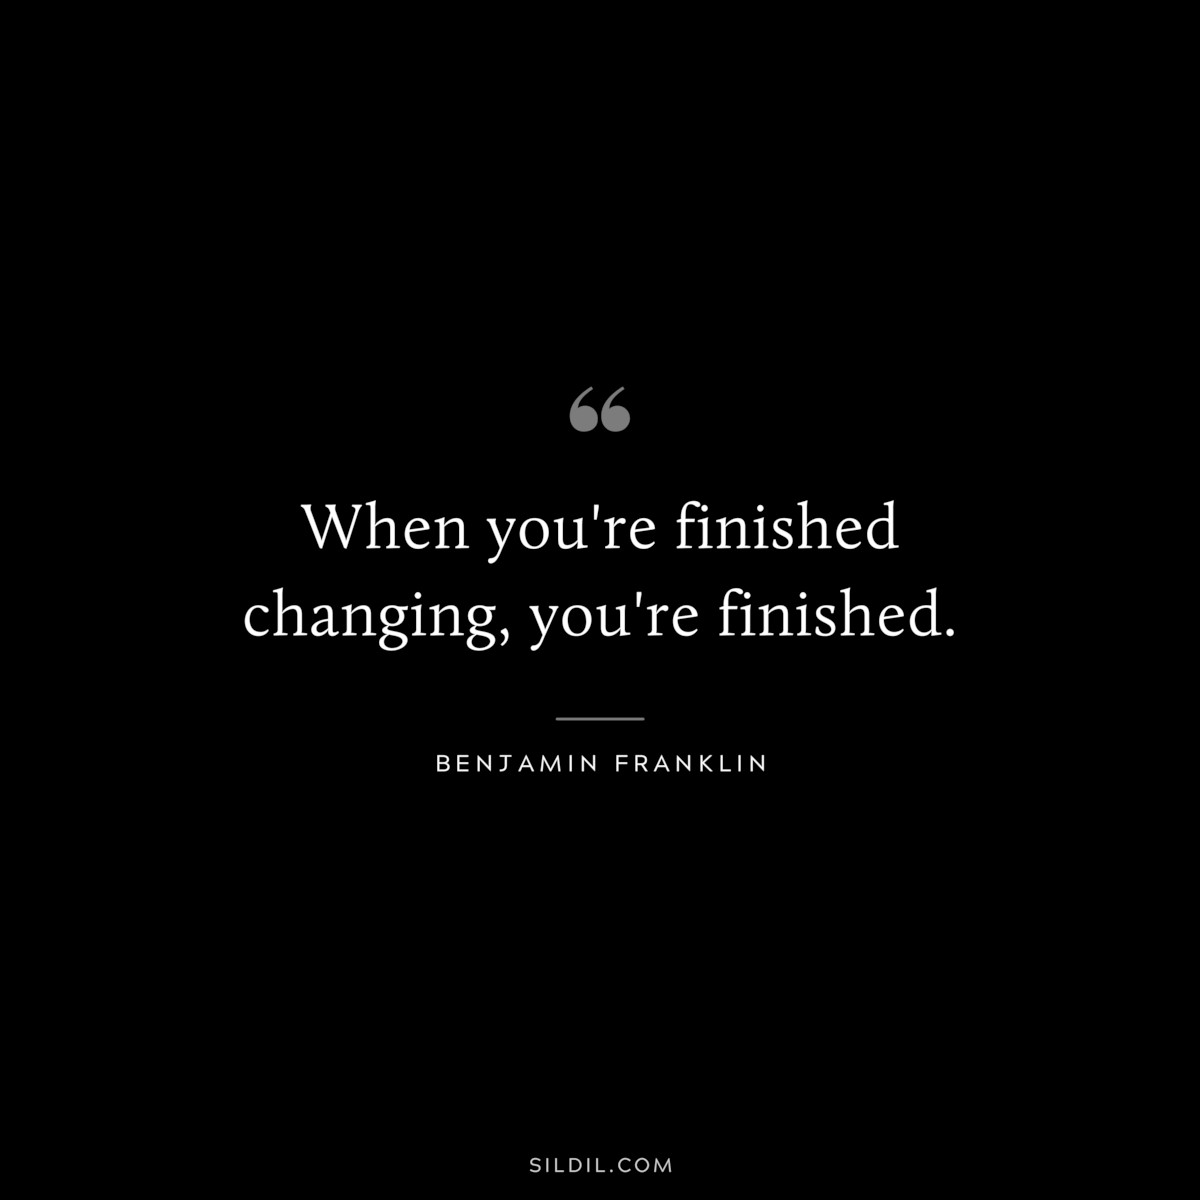 When you're finished changing, you're finished. ― Benjamin Franklin